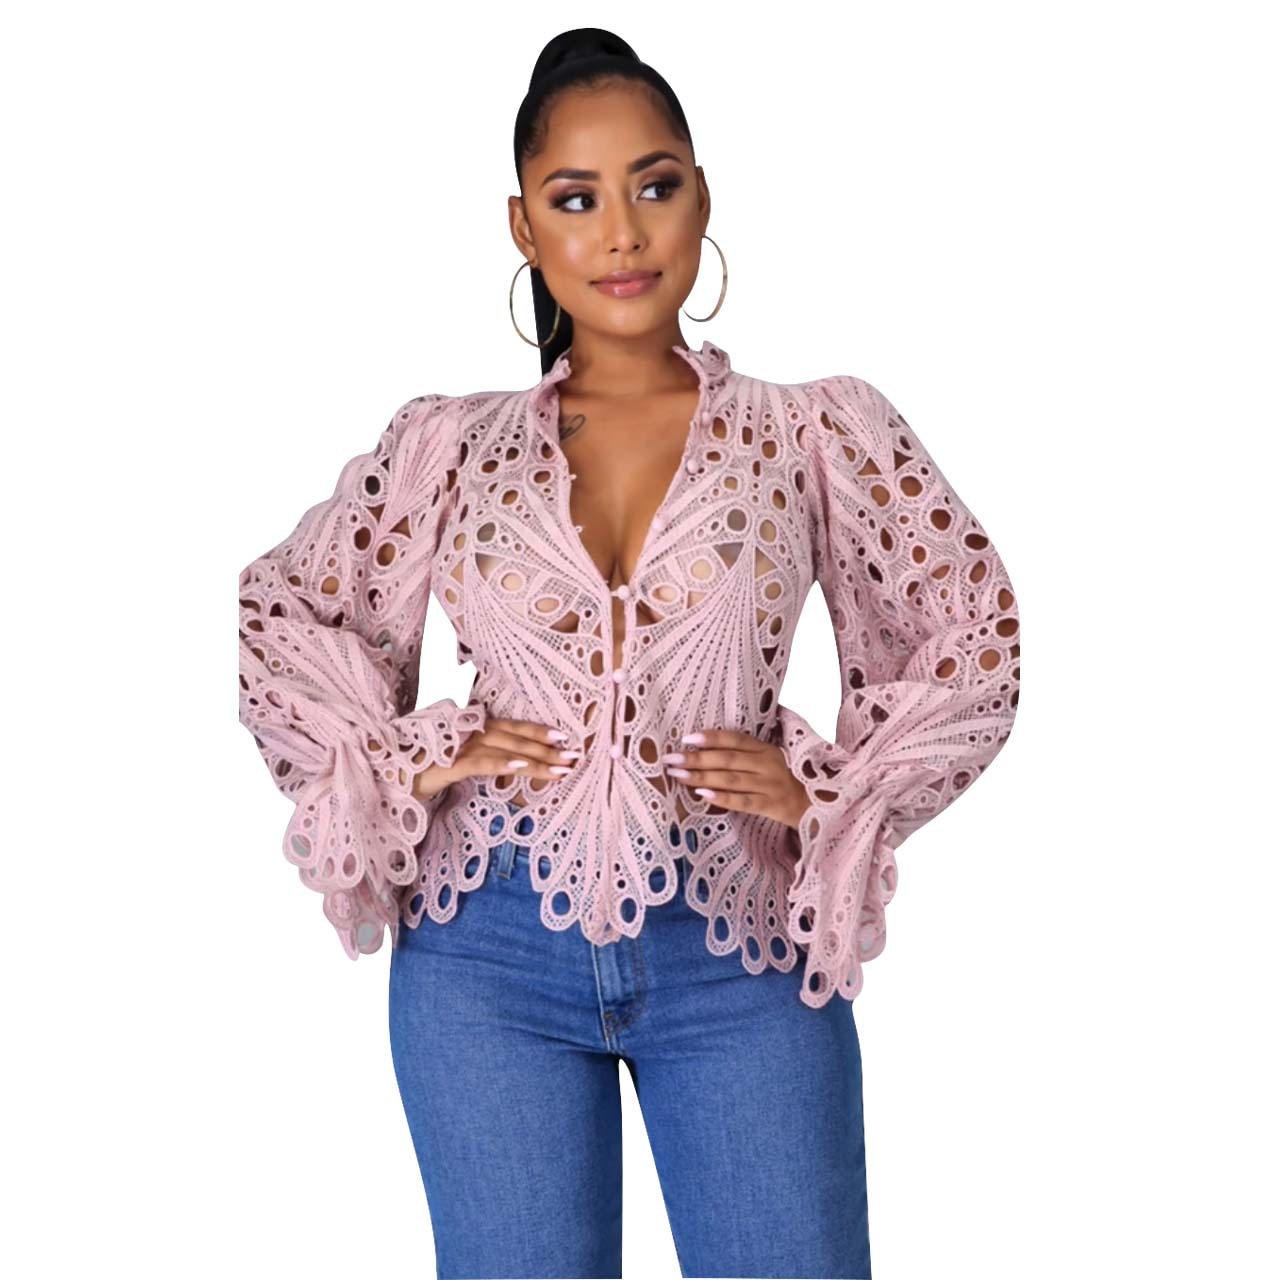 xakxx Women White Lace V Neck Hollow Out T-Shirts Long Sleeve Blouse Eyelet Embroidery Button Front Bell Sleeve Tops